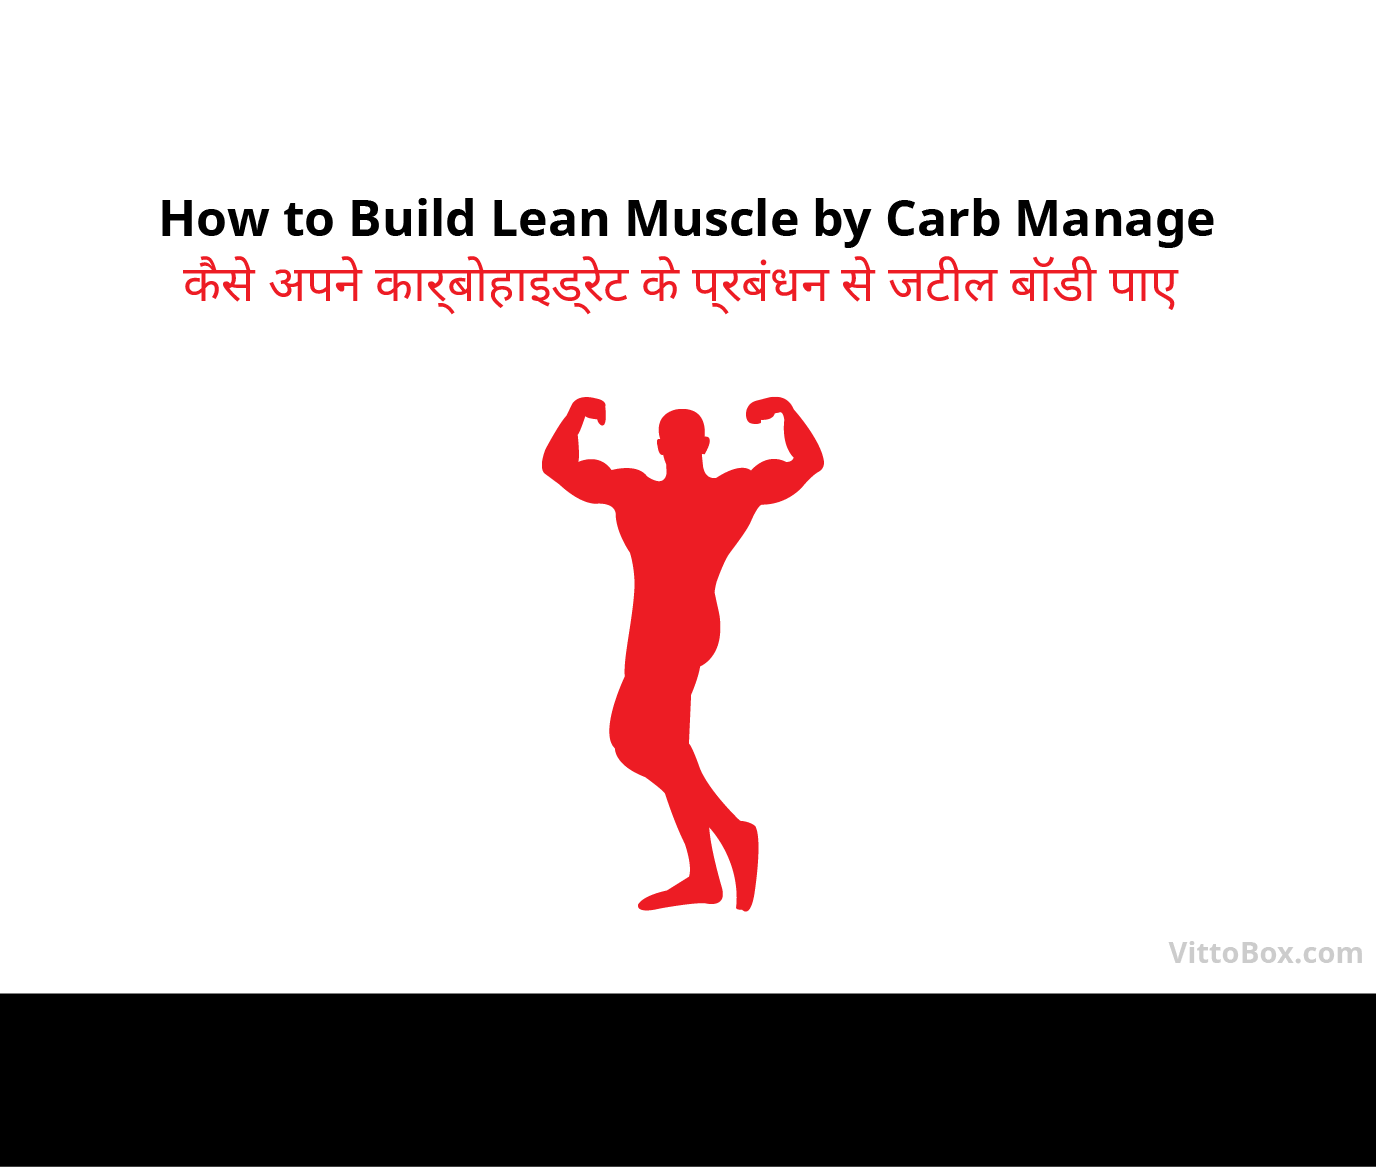 How To Build Lean Muscle By Carb Manage